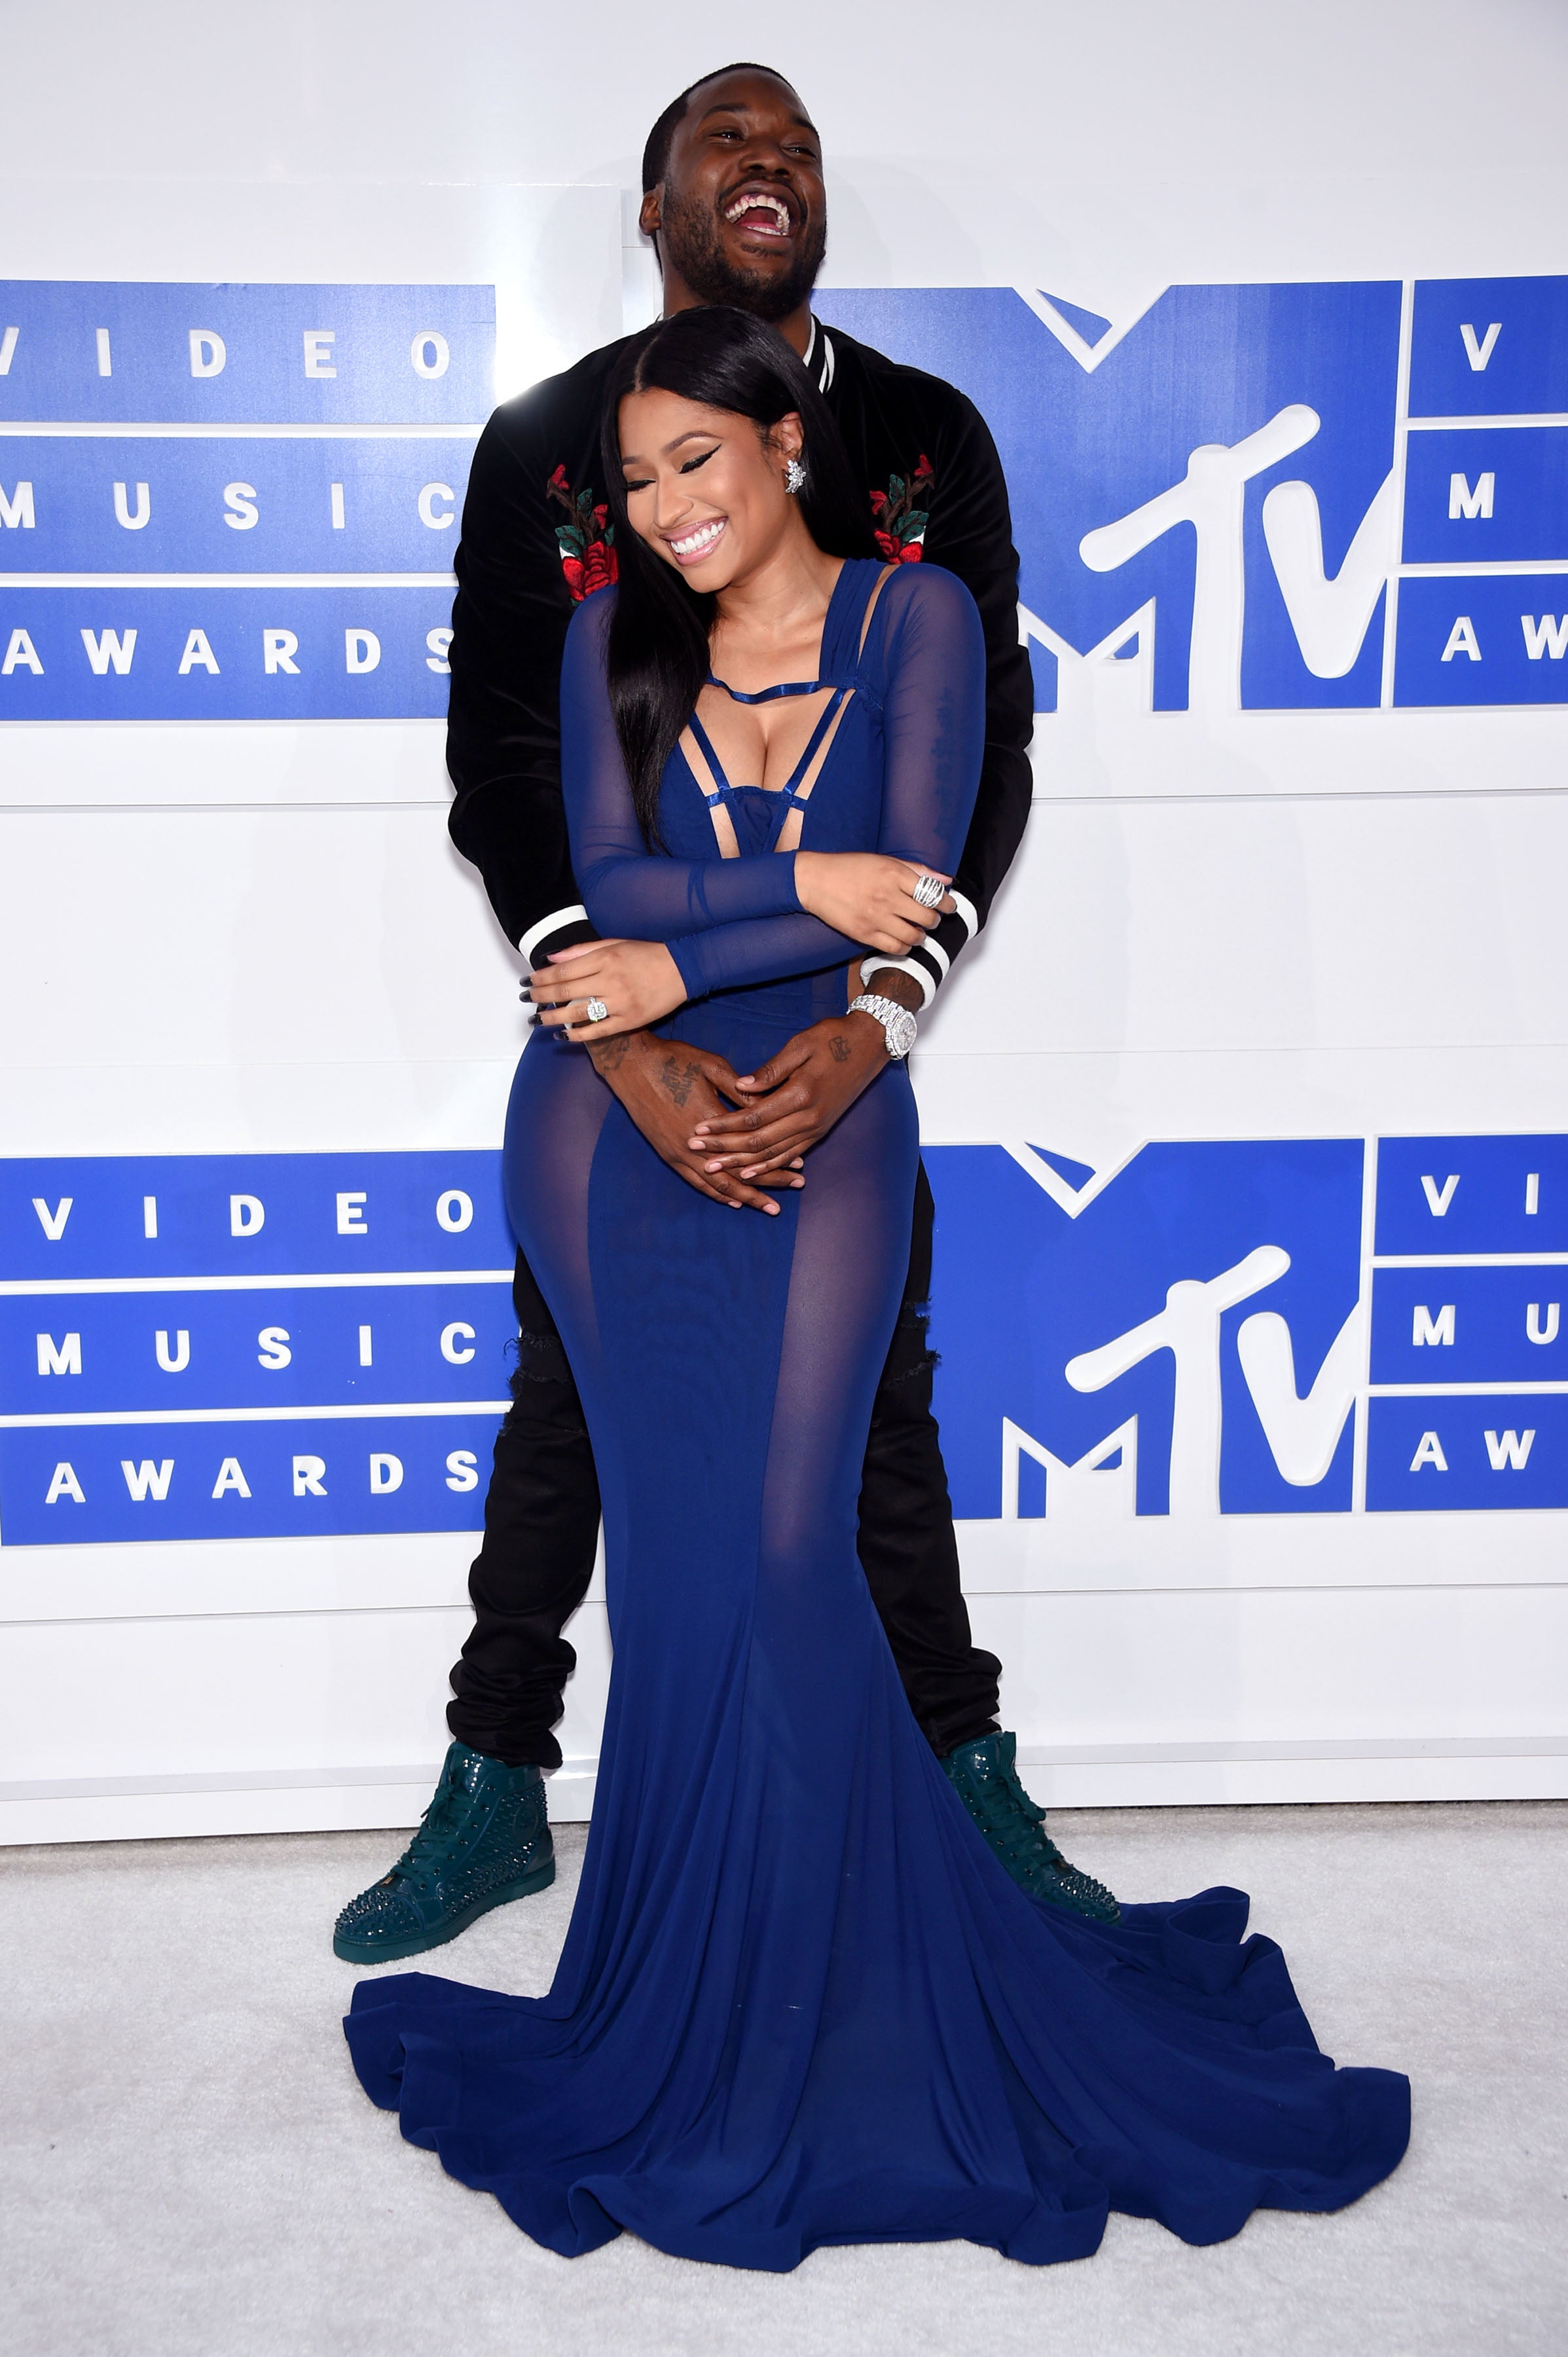 The Cutest Celebrity Couples at the 2016 MTV VMAs
